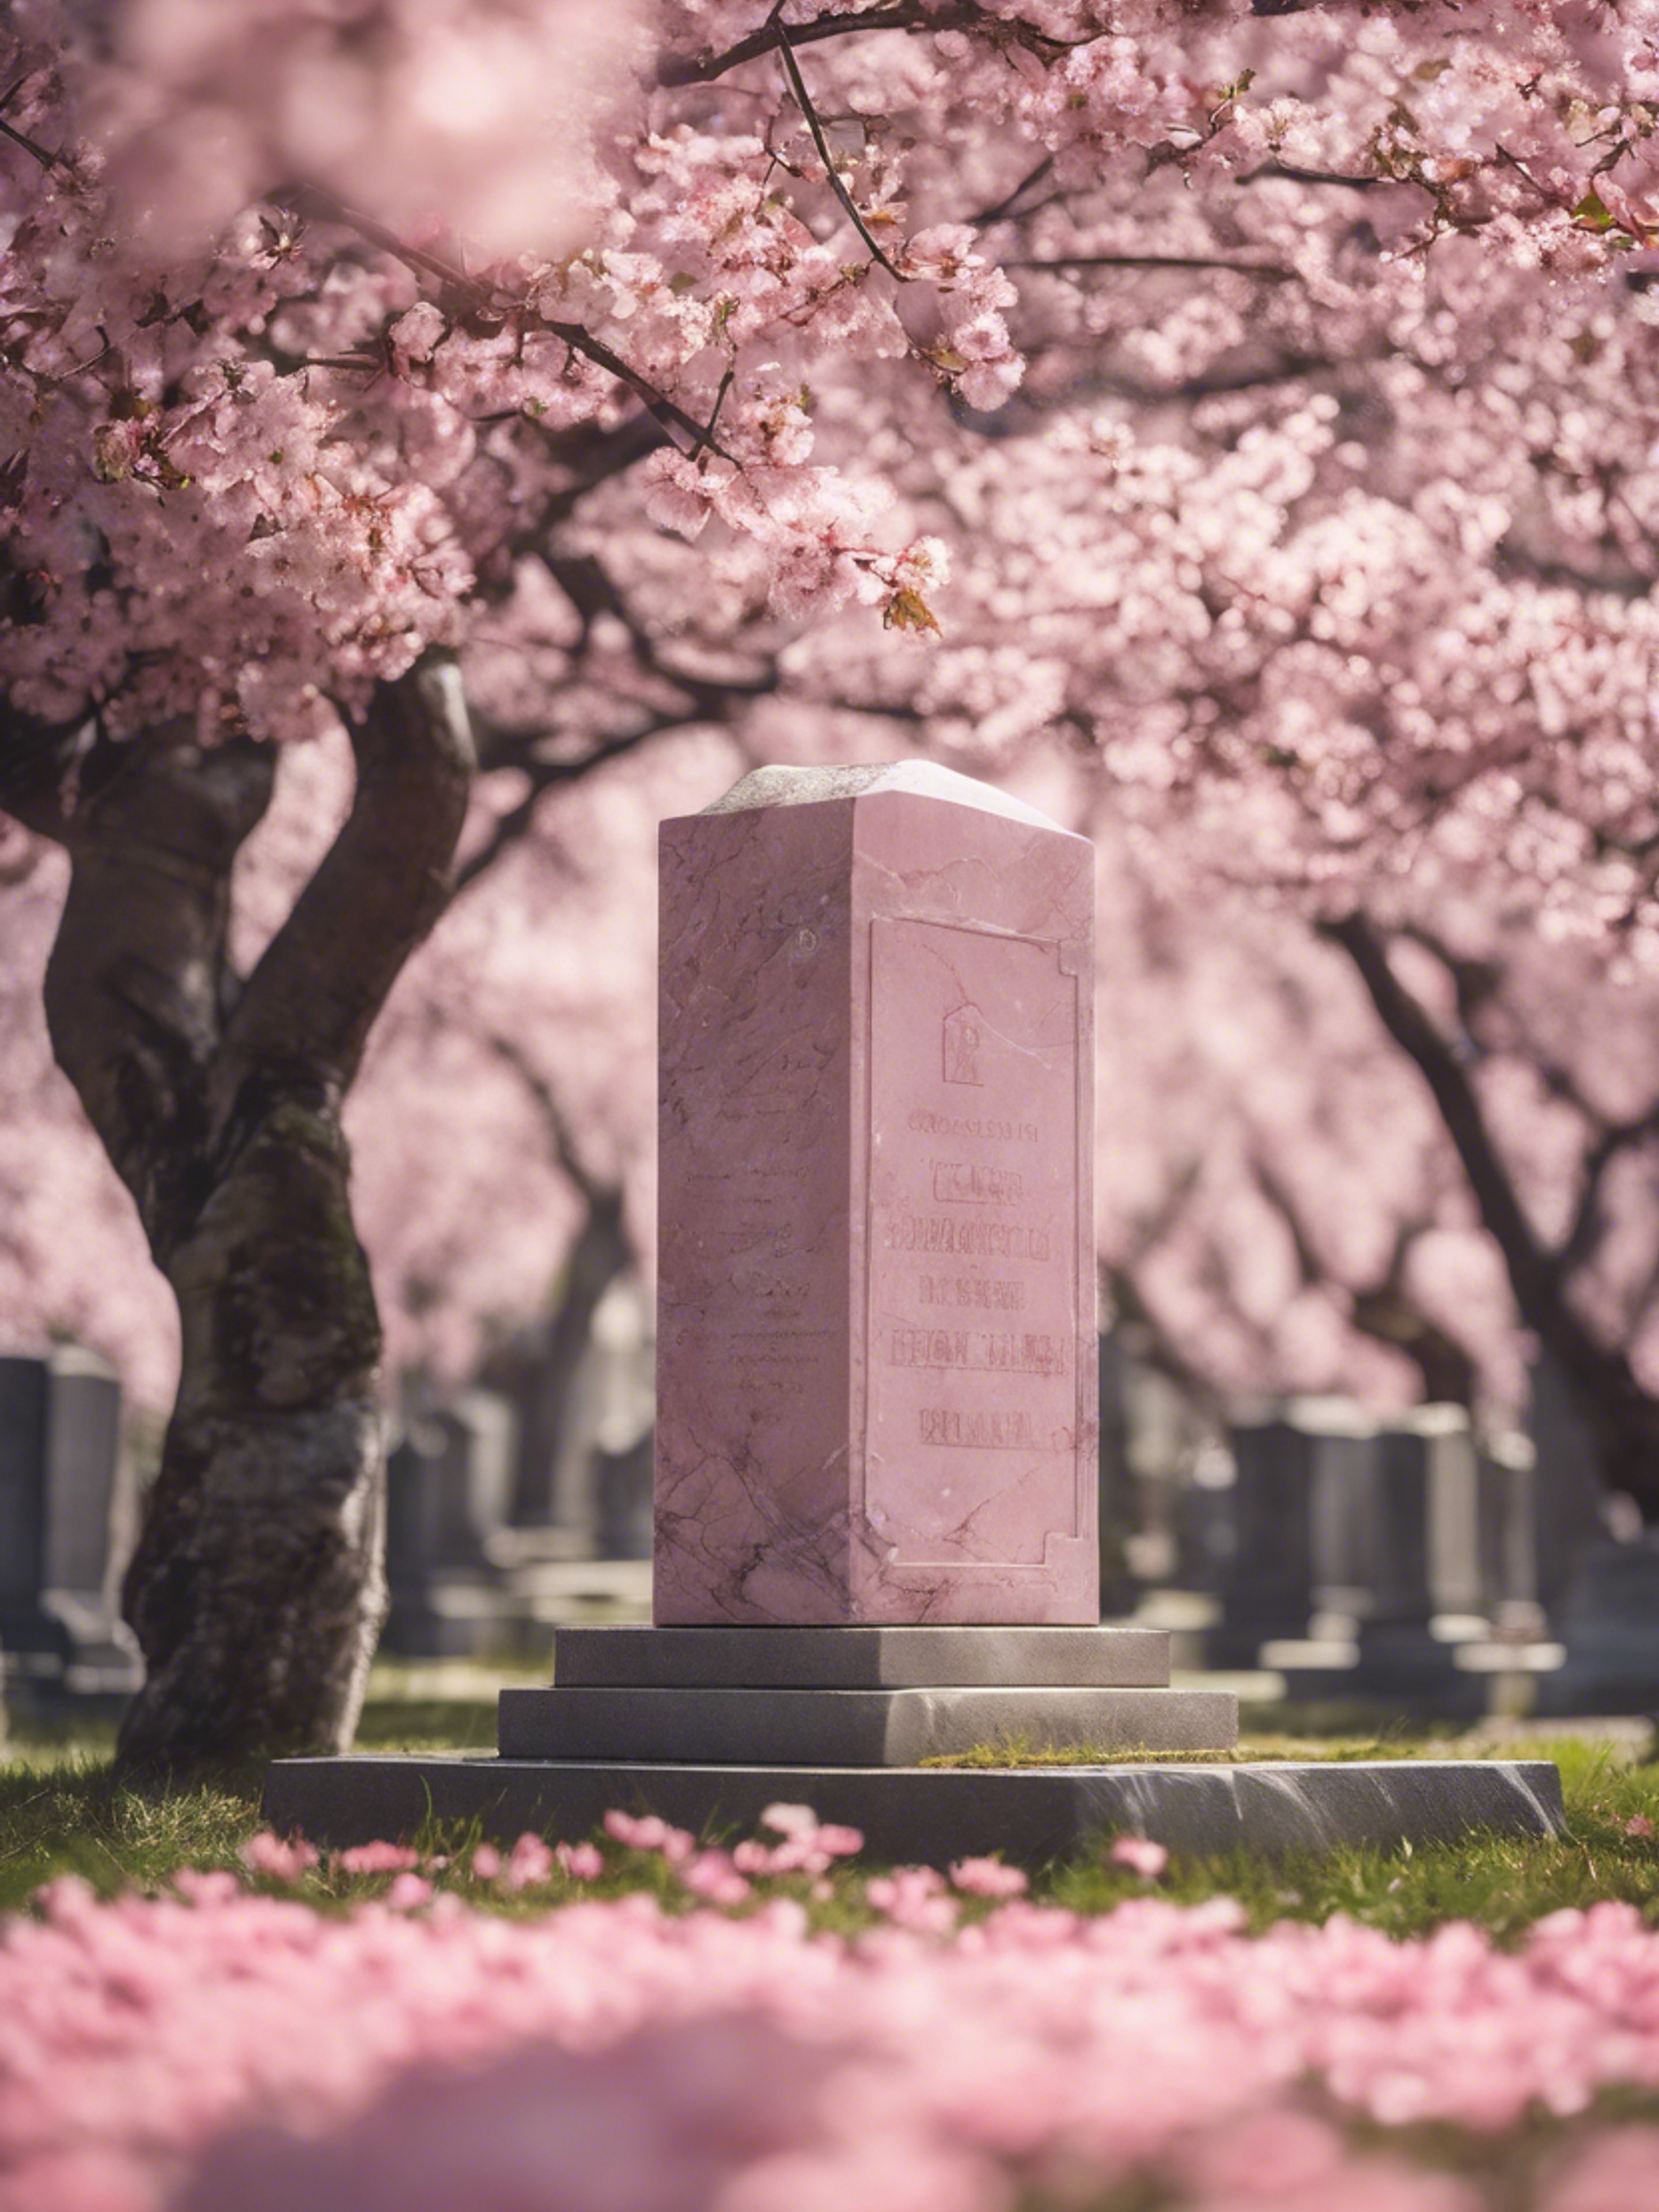 Pink marble headstone surrounded by blooming cherry blossom trees in a tranquil cemetery. ផ្ទាំង​រូបភាព[6605d21f56504ecfad88]